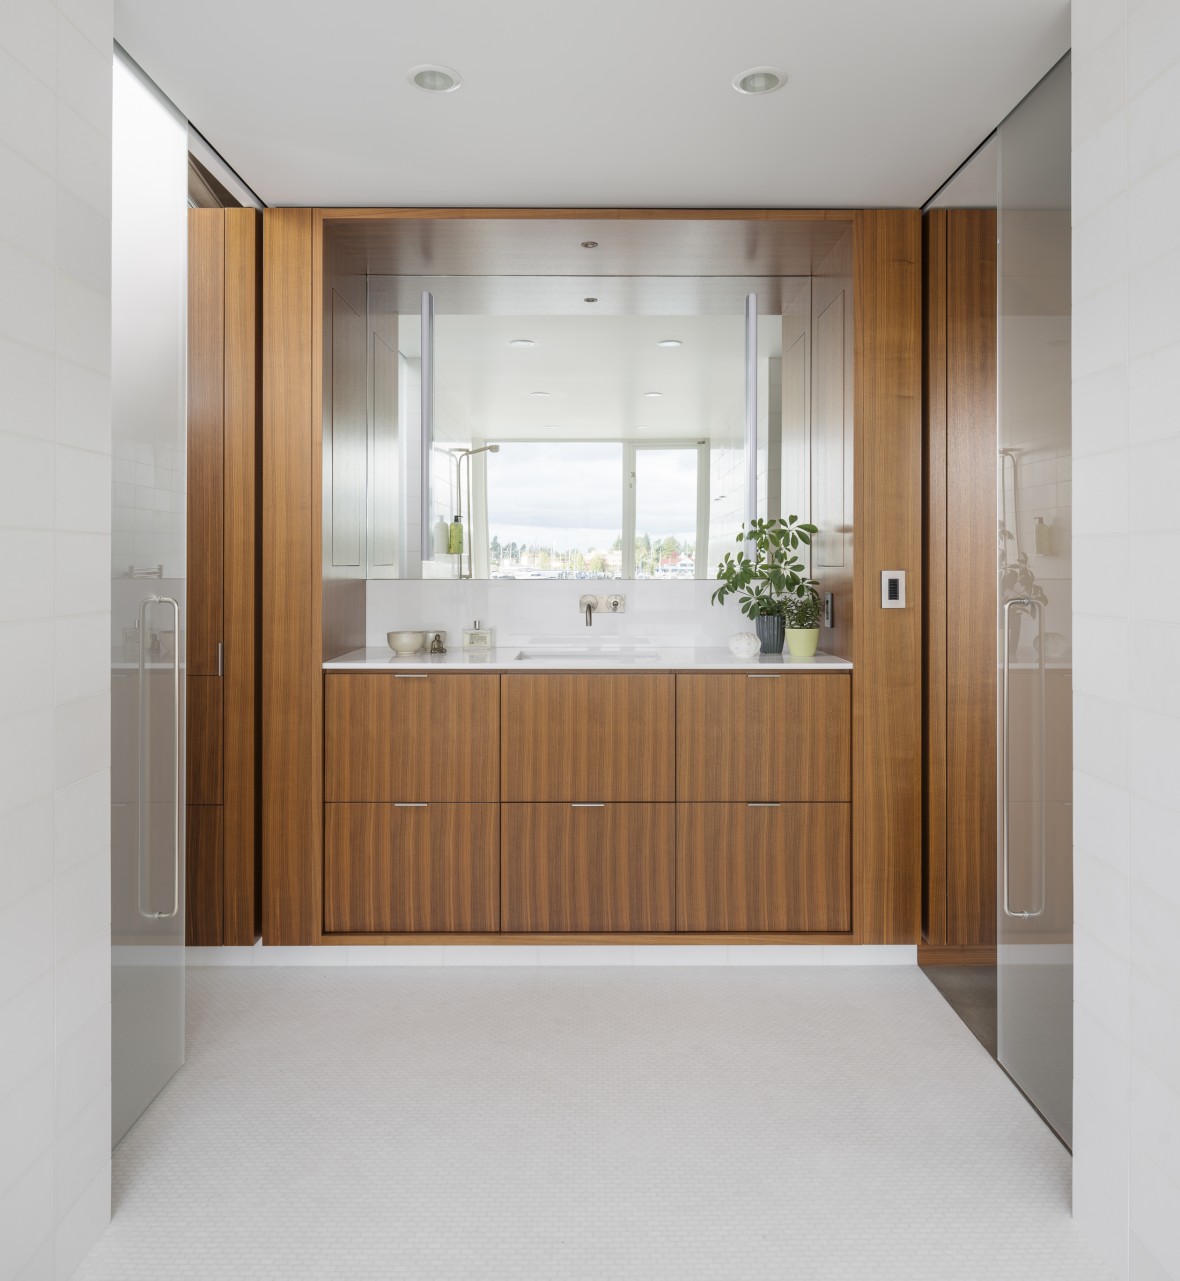 Even the bathroom walls are clad with wood for a comfy feel and to stick to the style